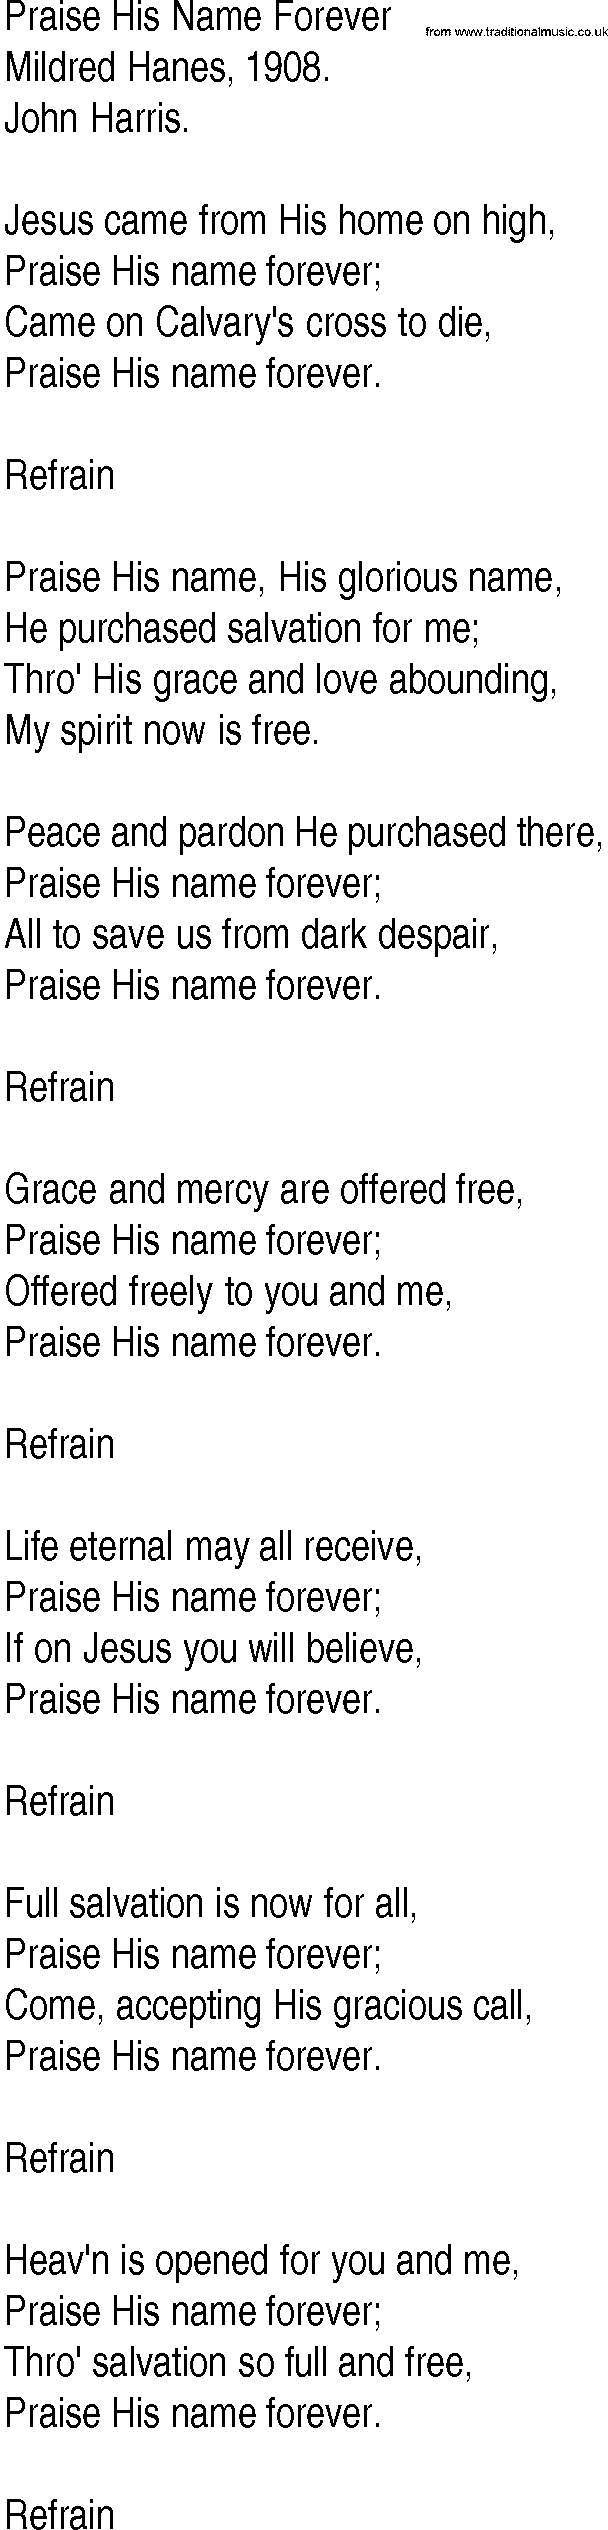 Hymn and Gospel Song: Praise His Name Forever by Mildred Hanes lyrics